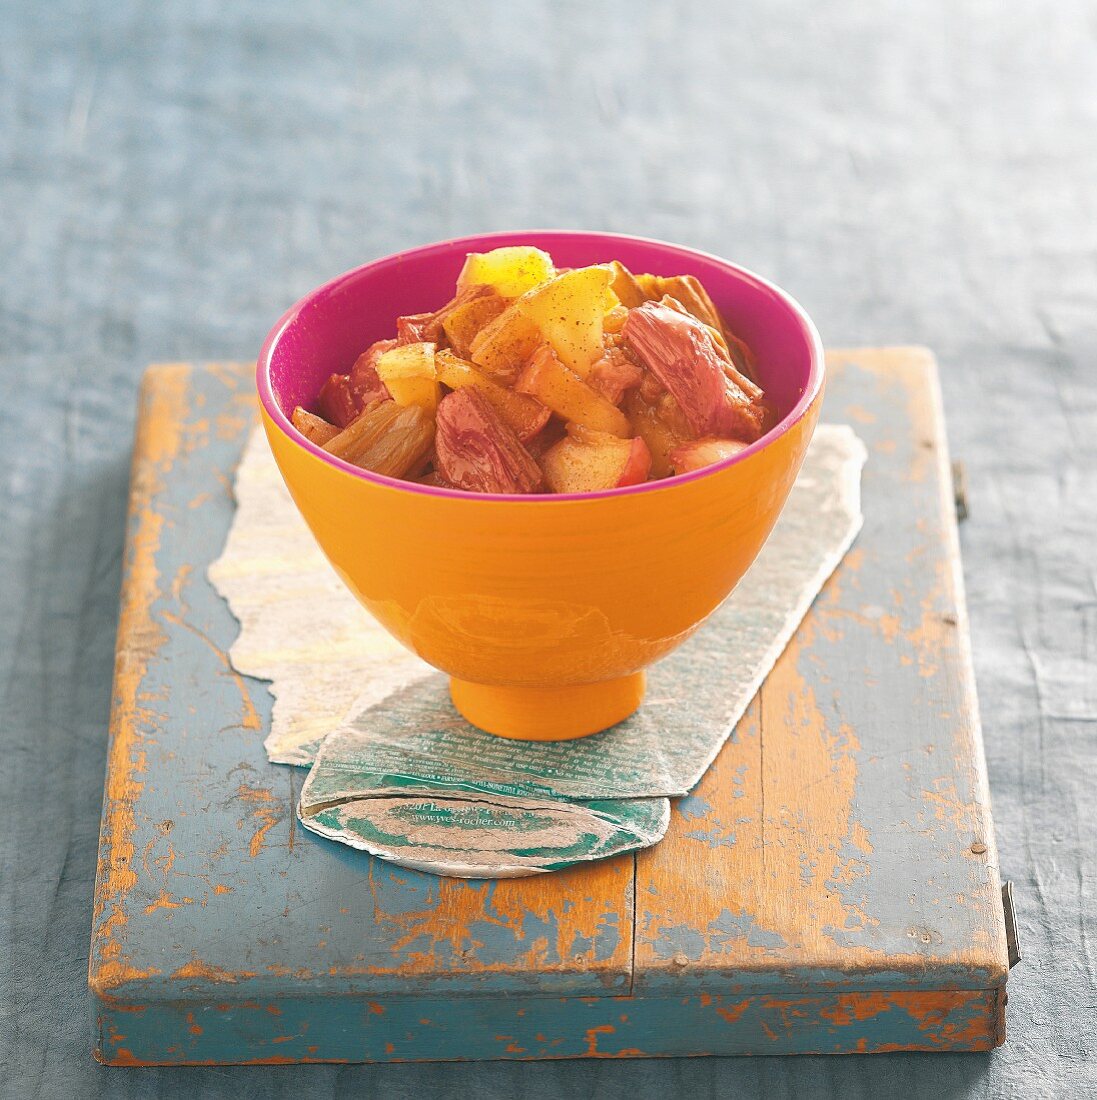 Apple and rhubarb compote